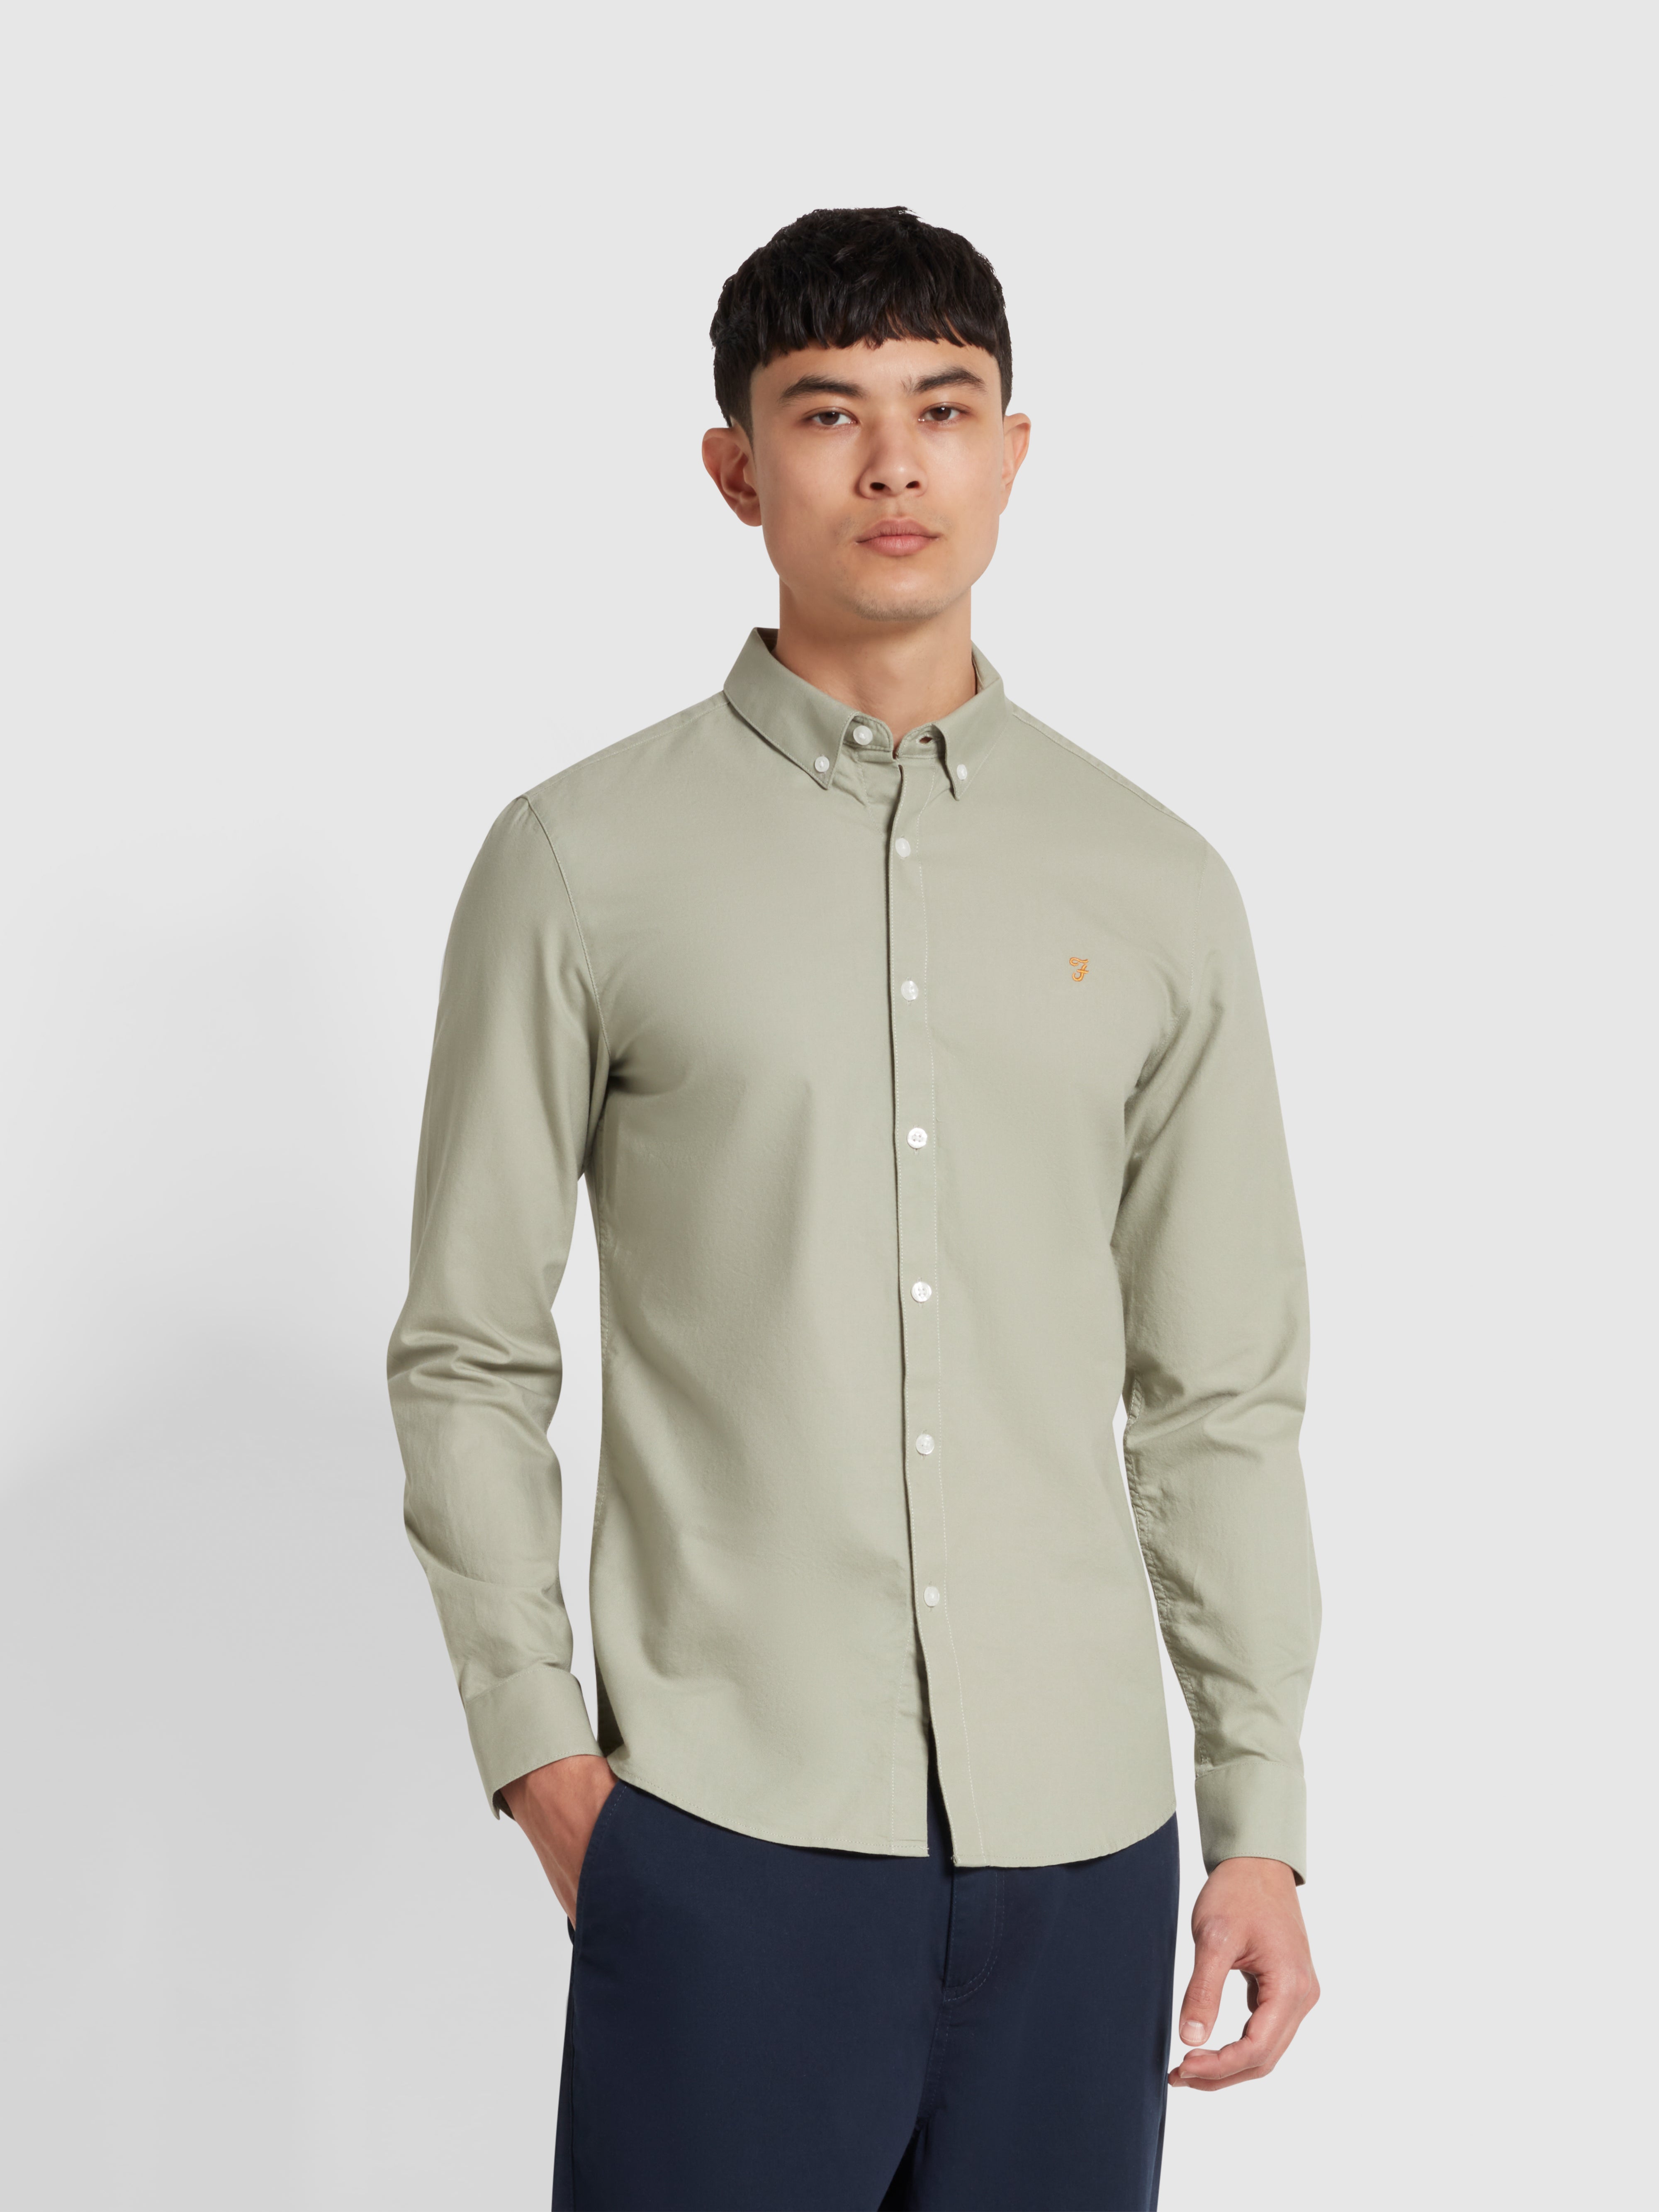 View Brewer Slim Fit Organic Cotton Long Sleeve Shirt In Balsam information